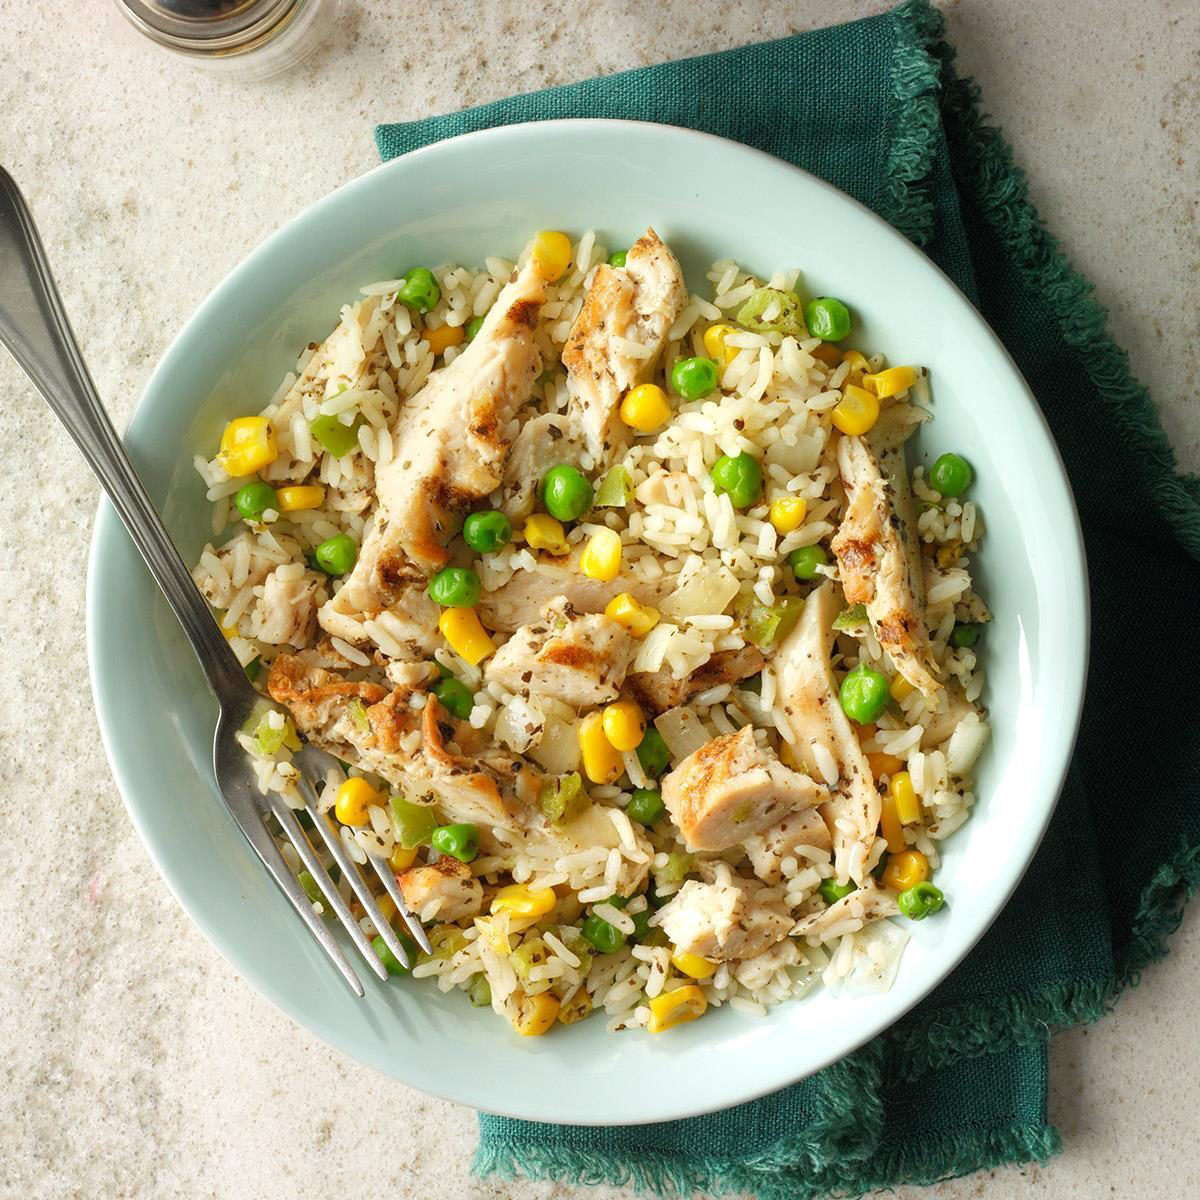 77 Low-Calorie Dinner Recipes Ready in 30 Minutes